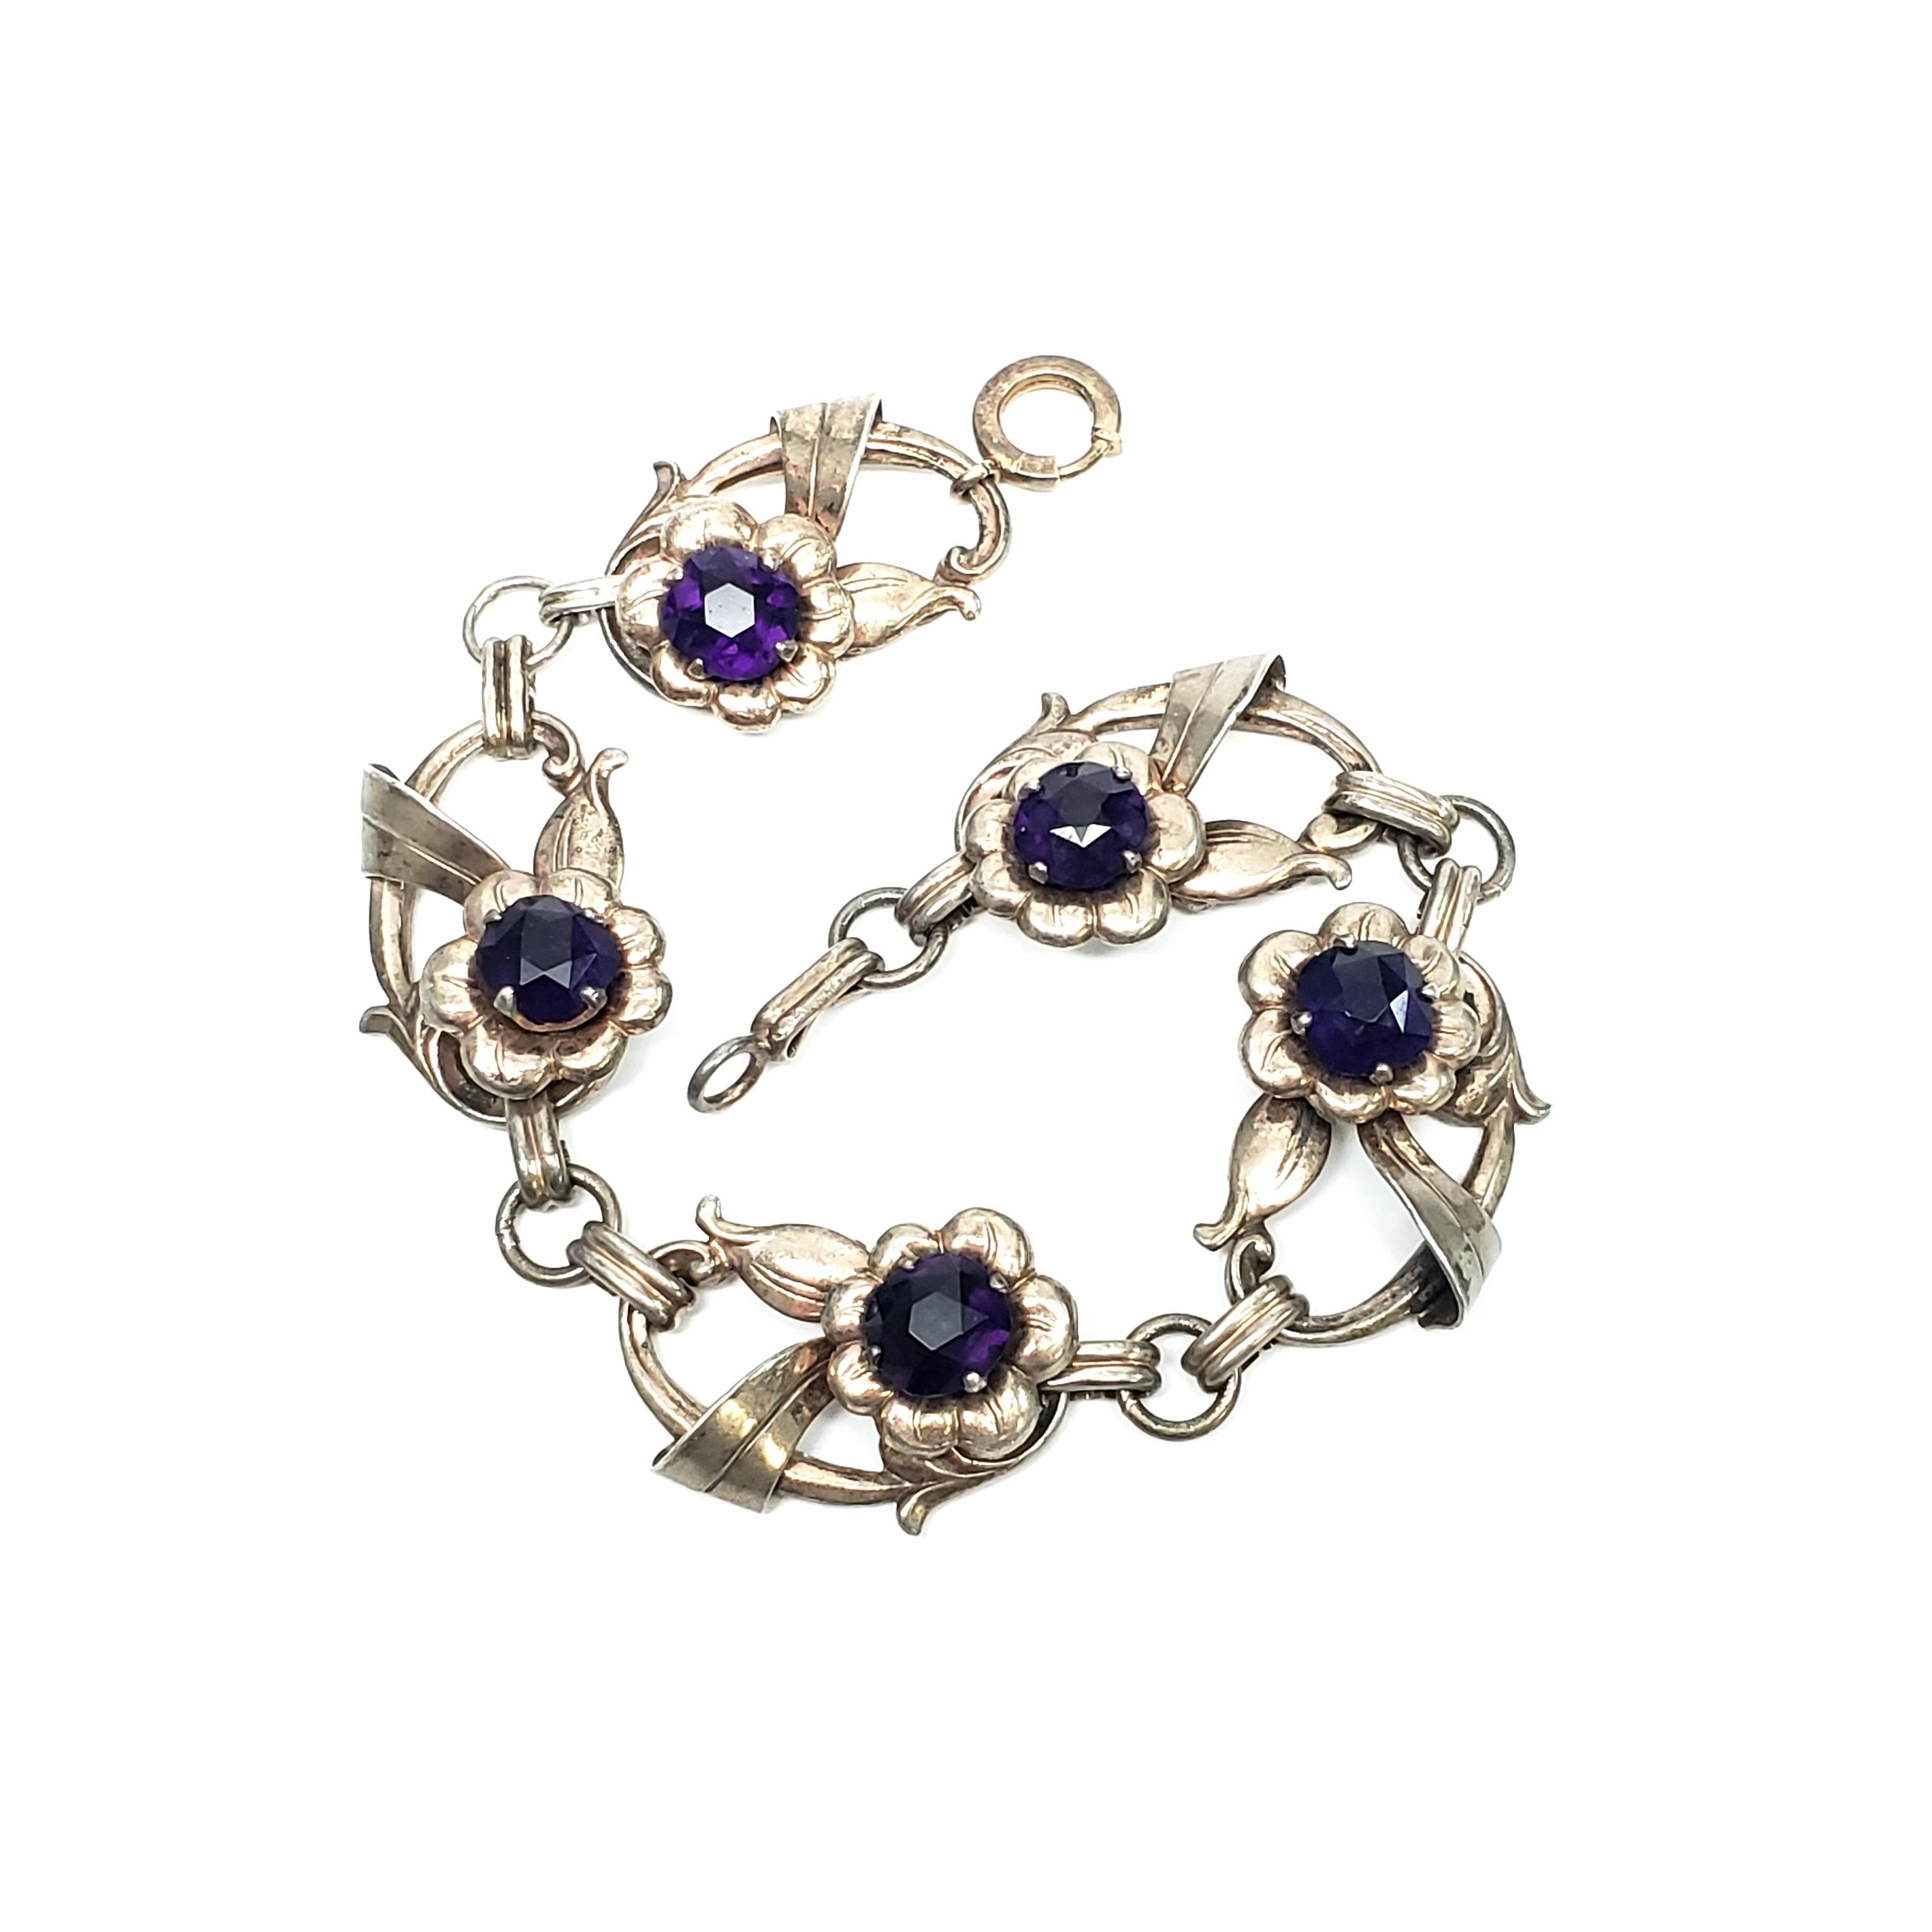 Gold vermeil over sterling silver link bracelet with purple glass stone by Harry Iskin.

Unique oval link bracelet with flower detail and purple glass stones.

Measures approx 8